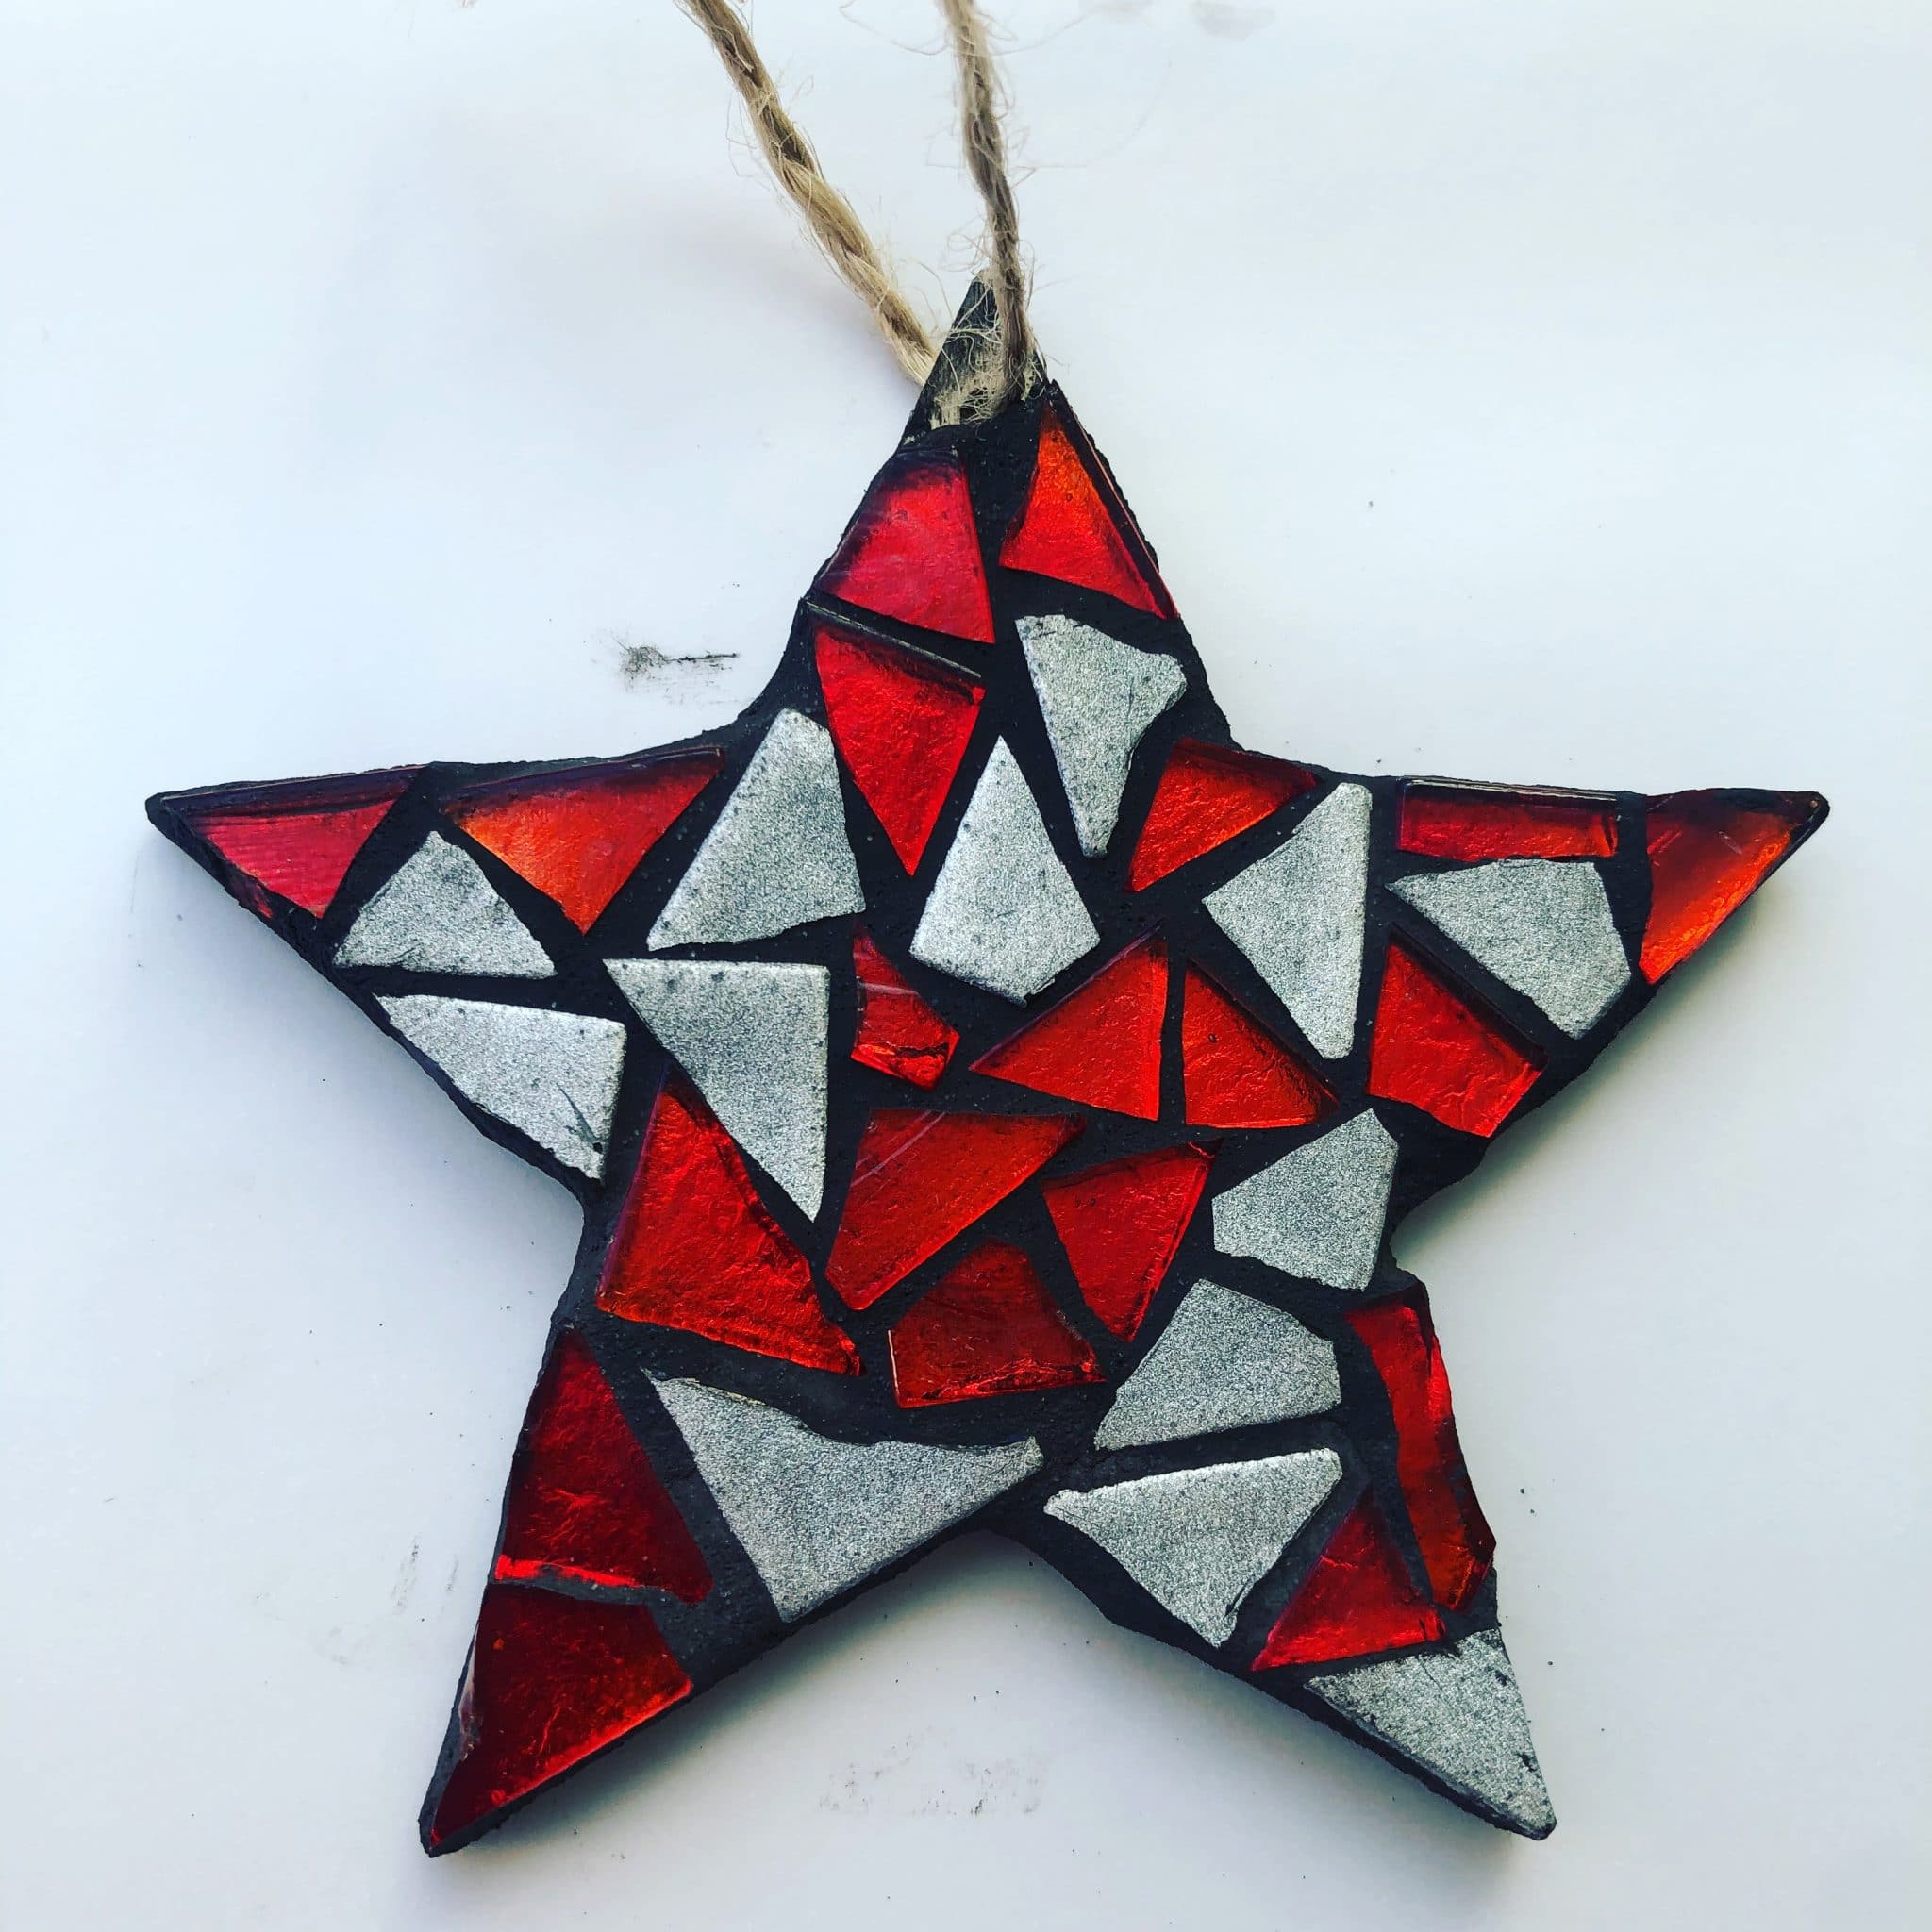 Small red, white and black star mosaic